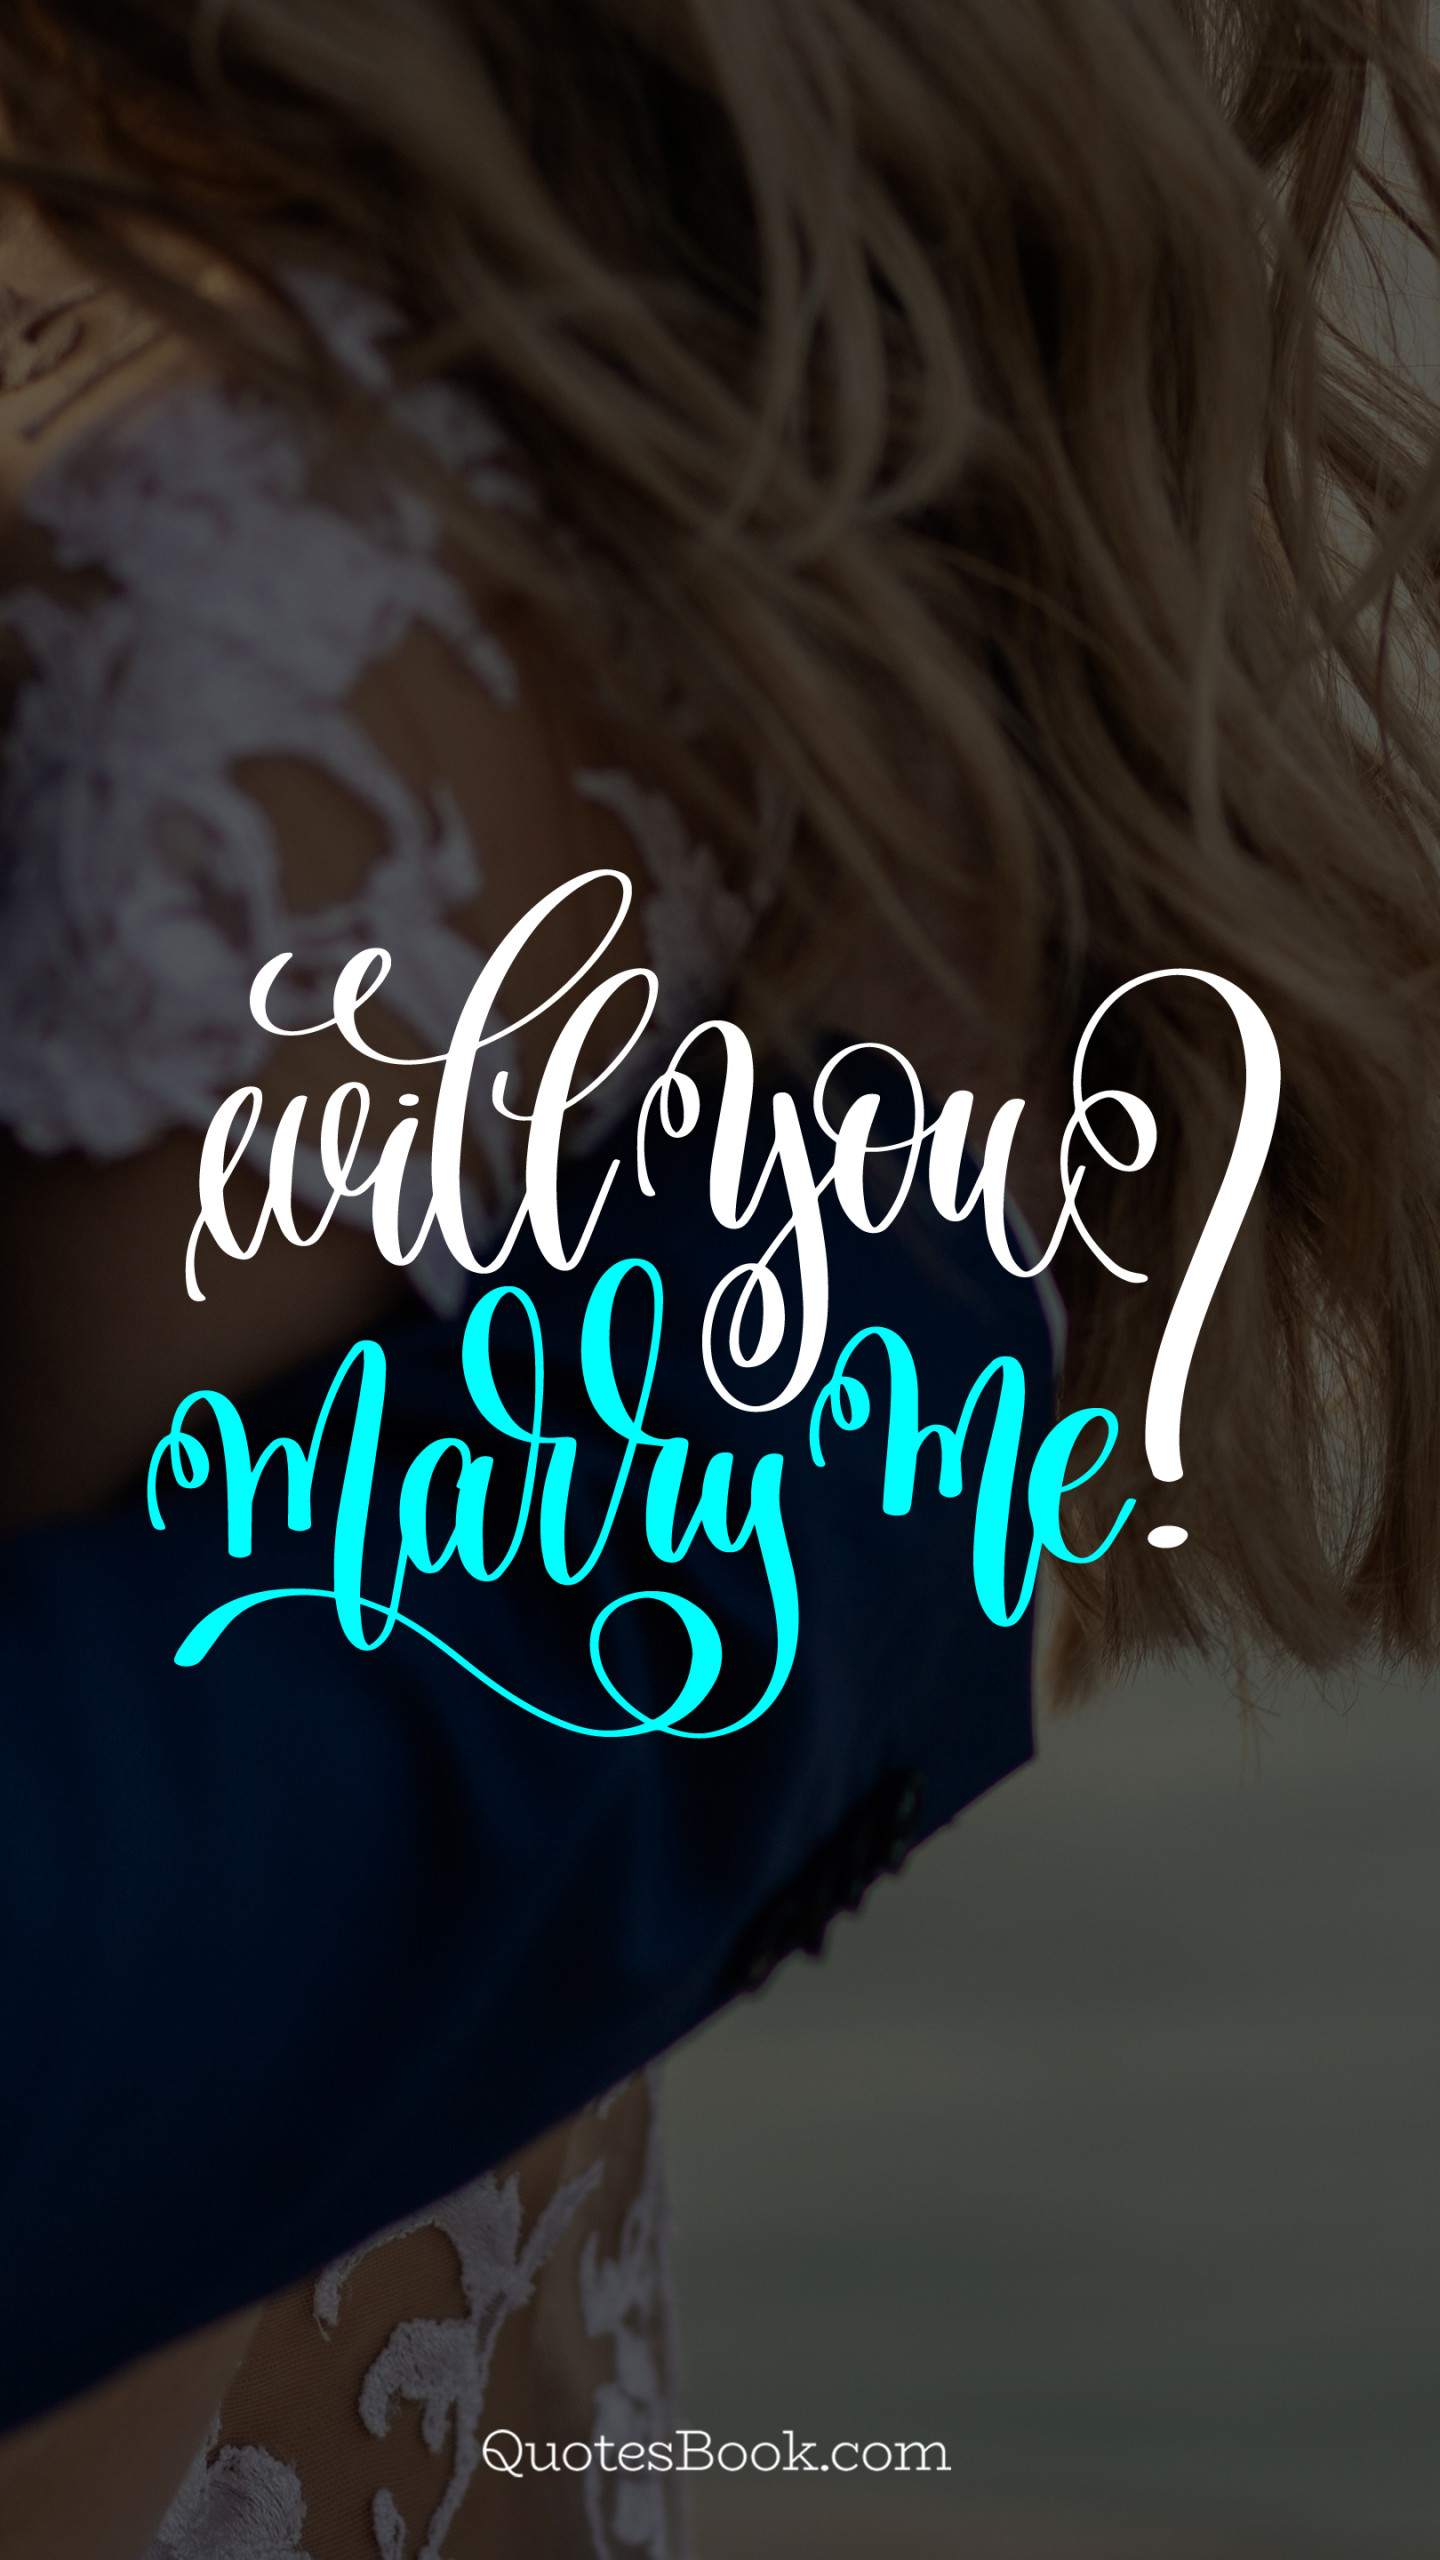 Will you marry me? - QuotesBook